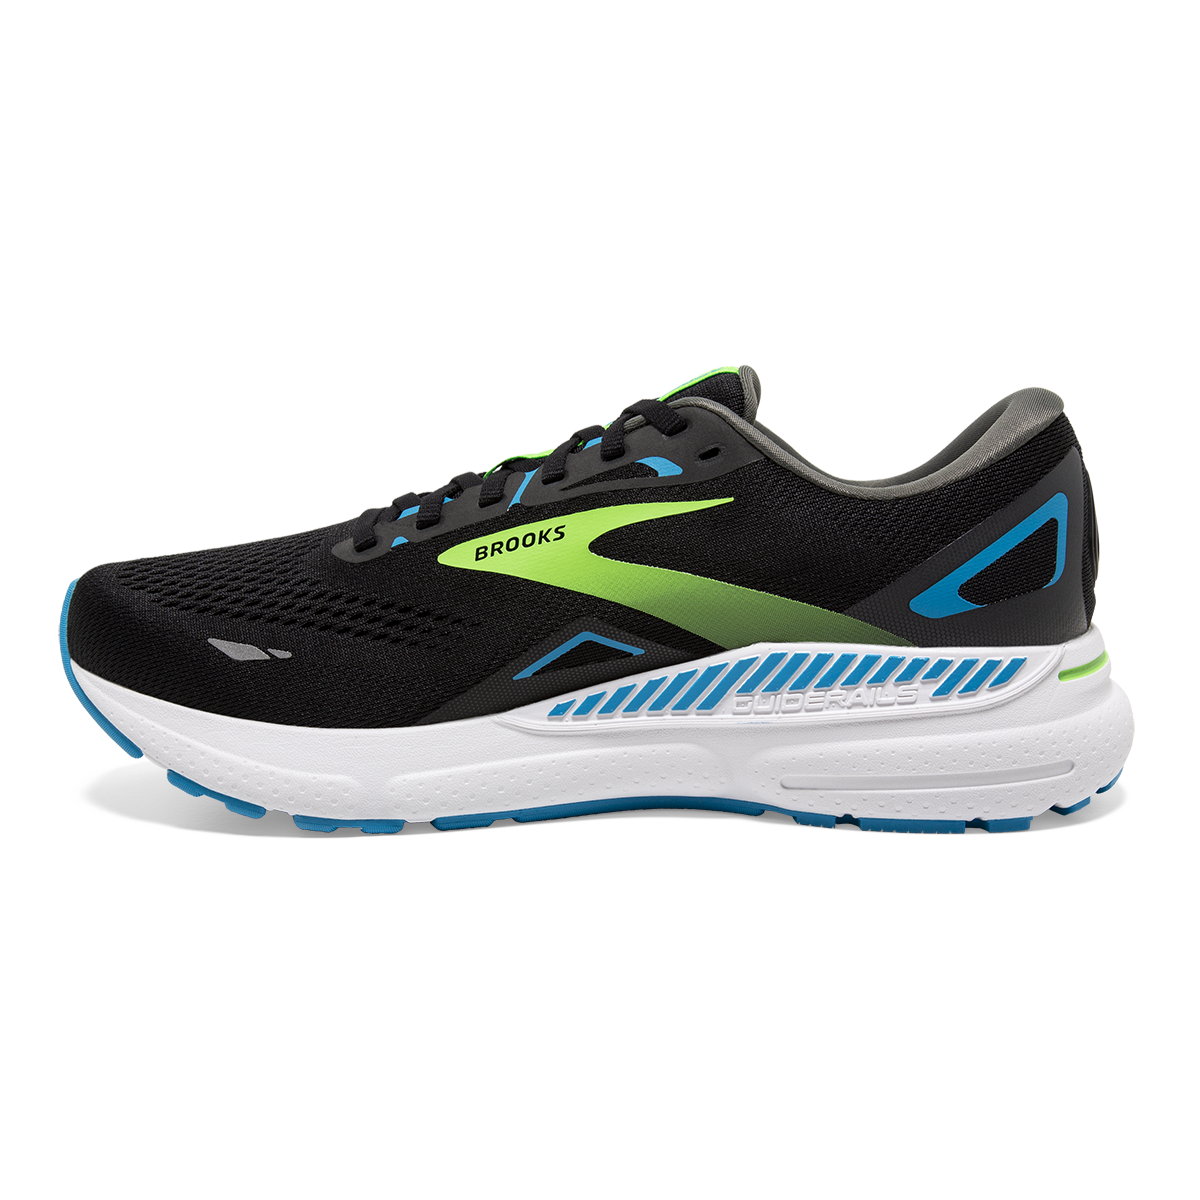 Medial view of the Men's Adrenaline GTS 23 by Brook's in the color Black/Hawaiian Ocean/Green